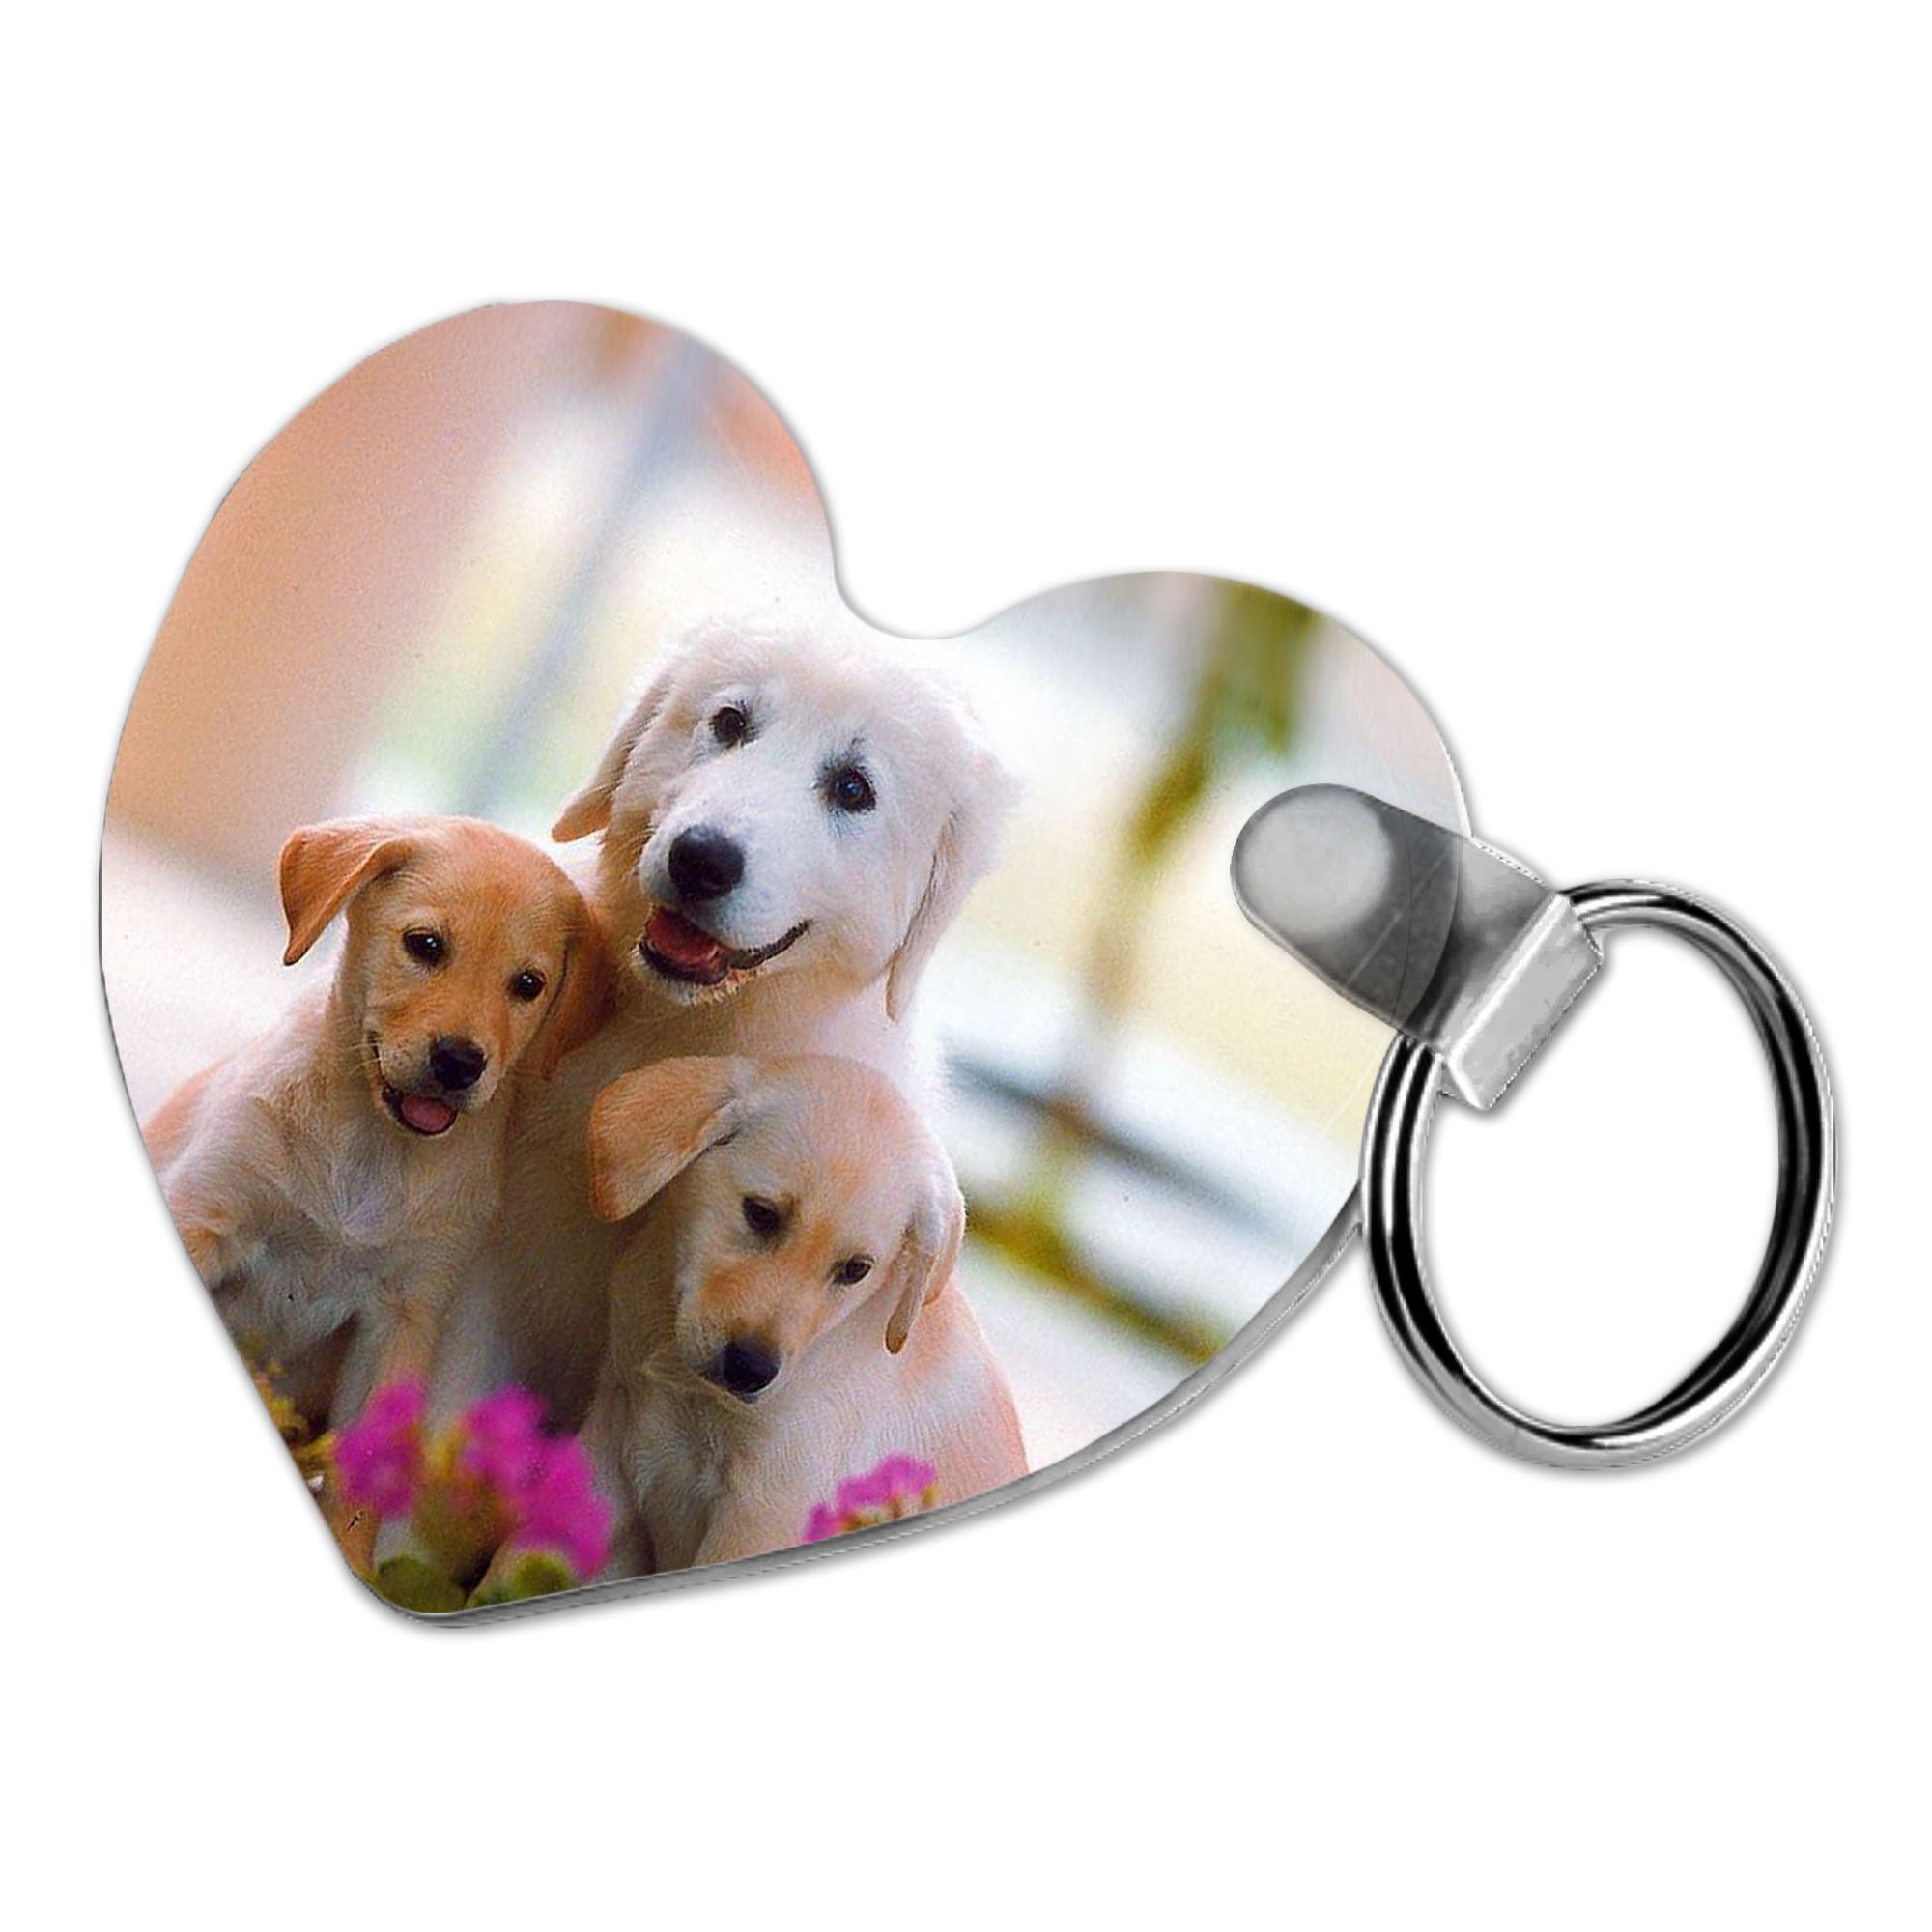 Heart House Radius And Ulna Bone Square Keychain Set DIY Sublimation Key  Accessories For Women And Men With Blank Board And Printing Keyrings From  Lucy0, $20.68